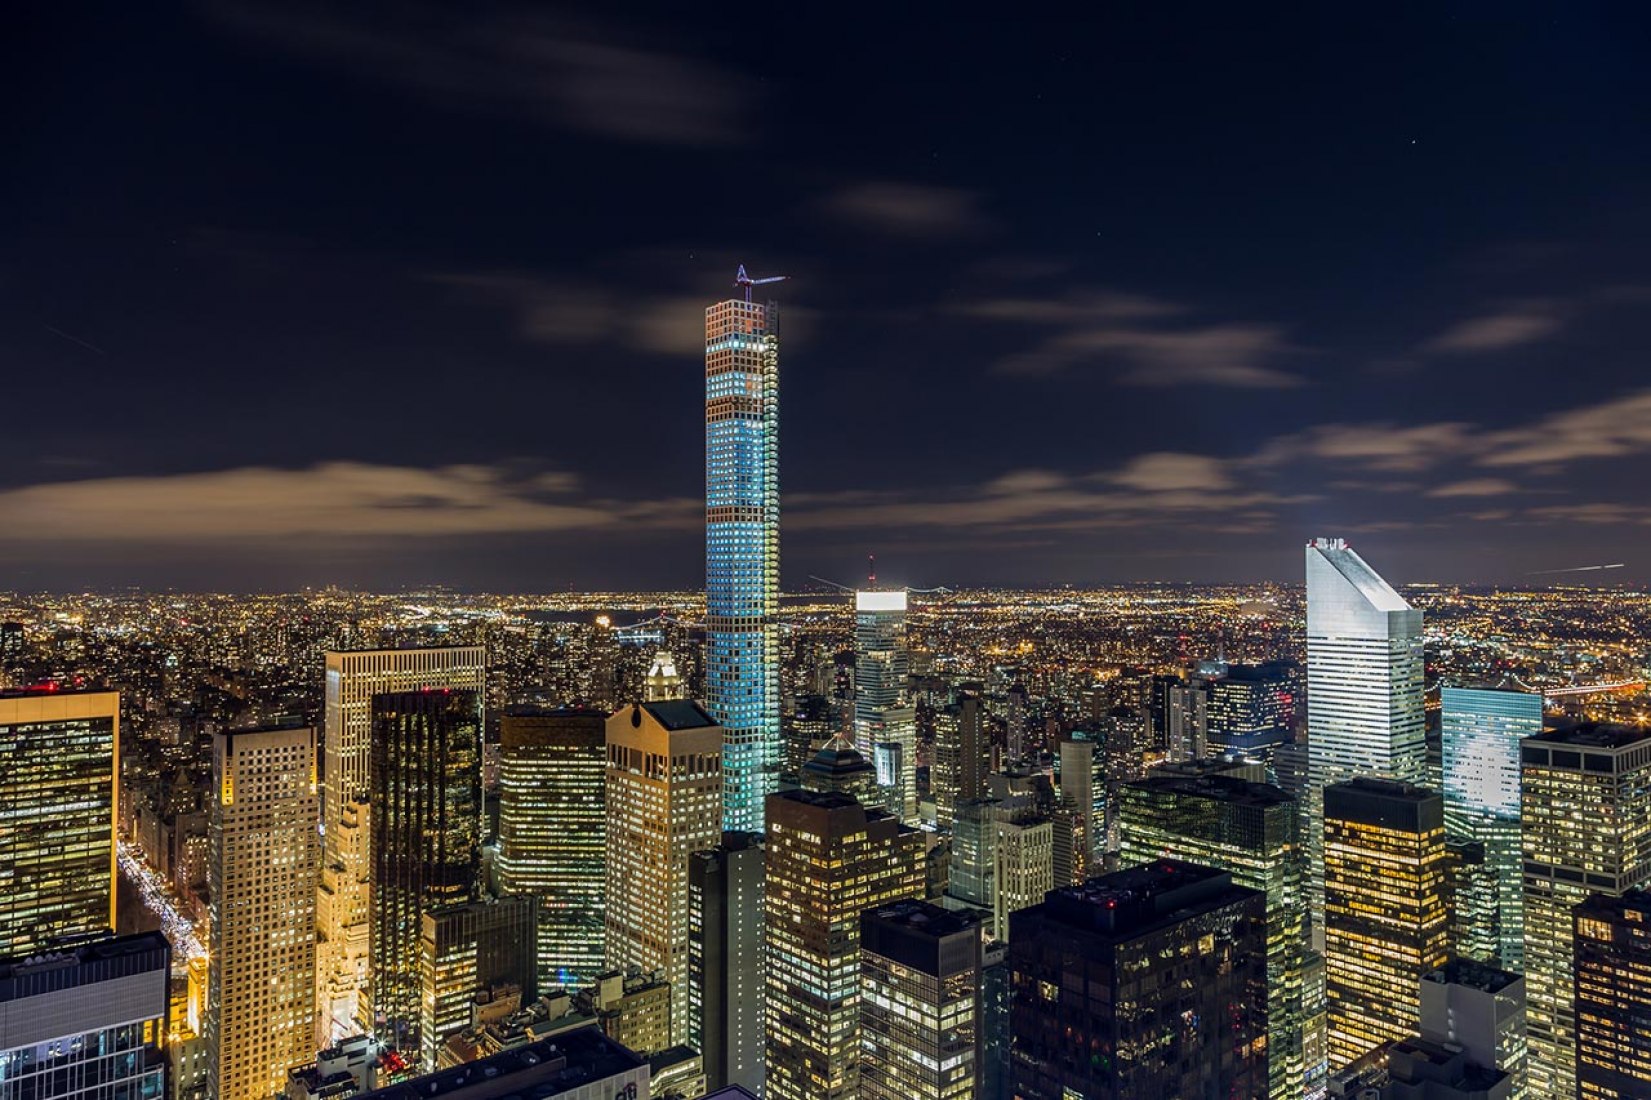 Night view 432 Park Ave tower by Viñoly, Image from Flickr user Ikaloti